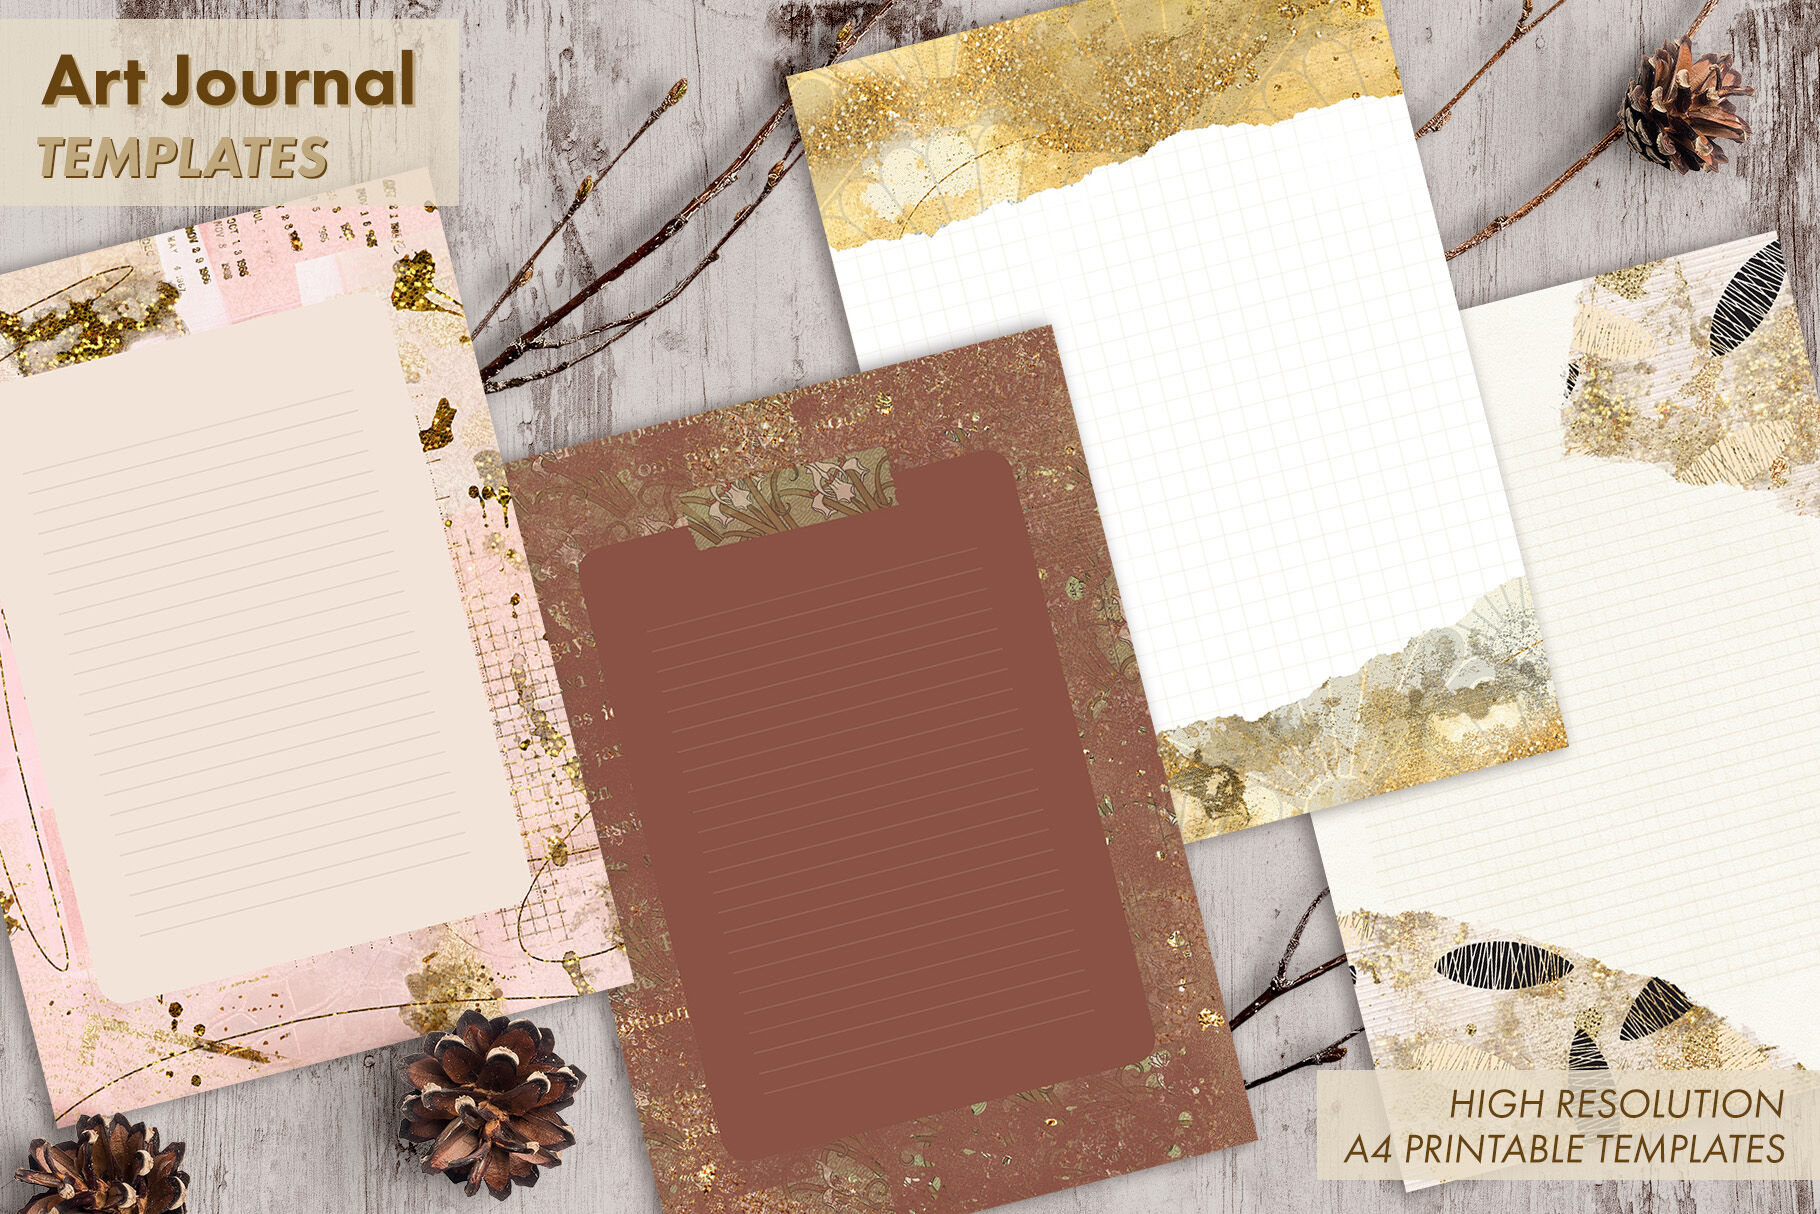 Art Journal Templates By LuOtero